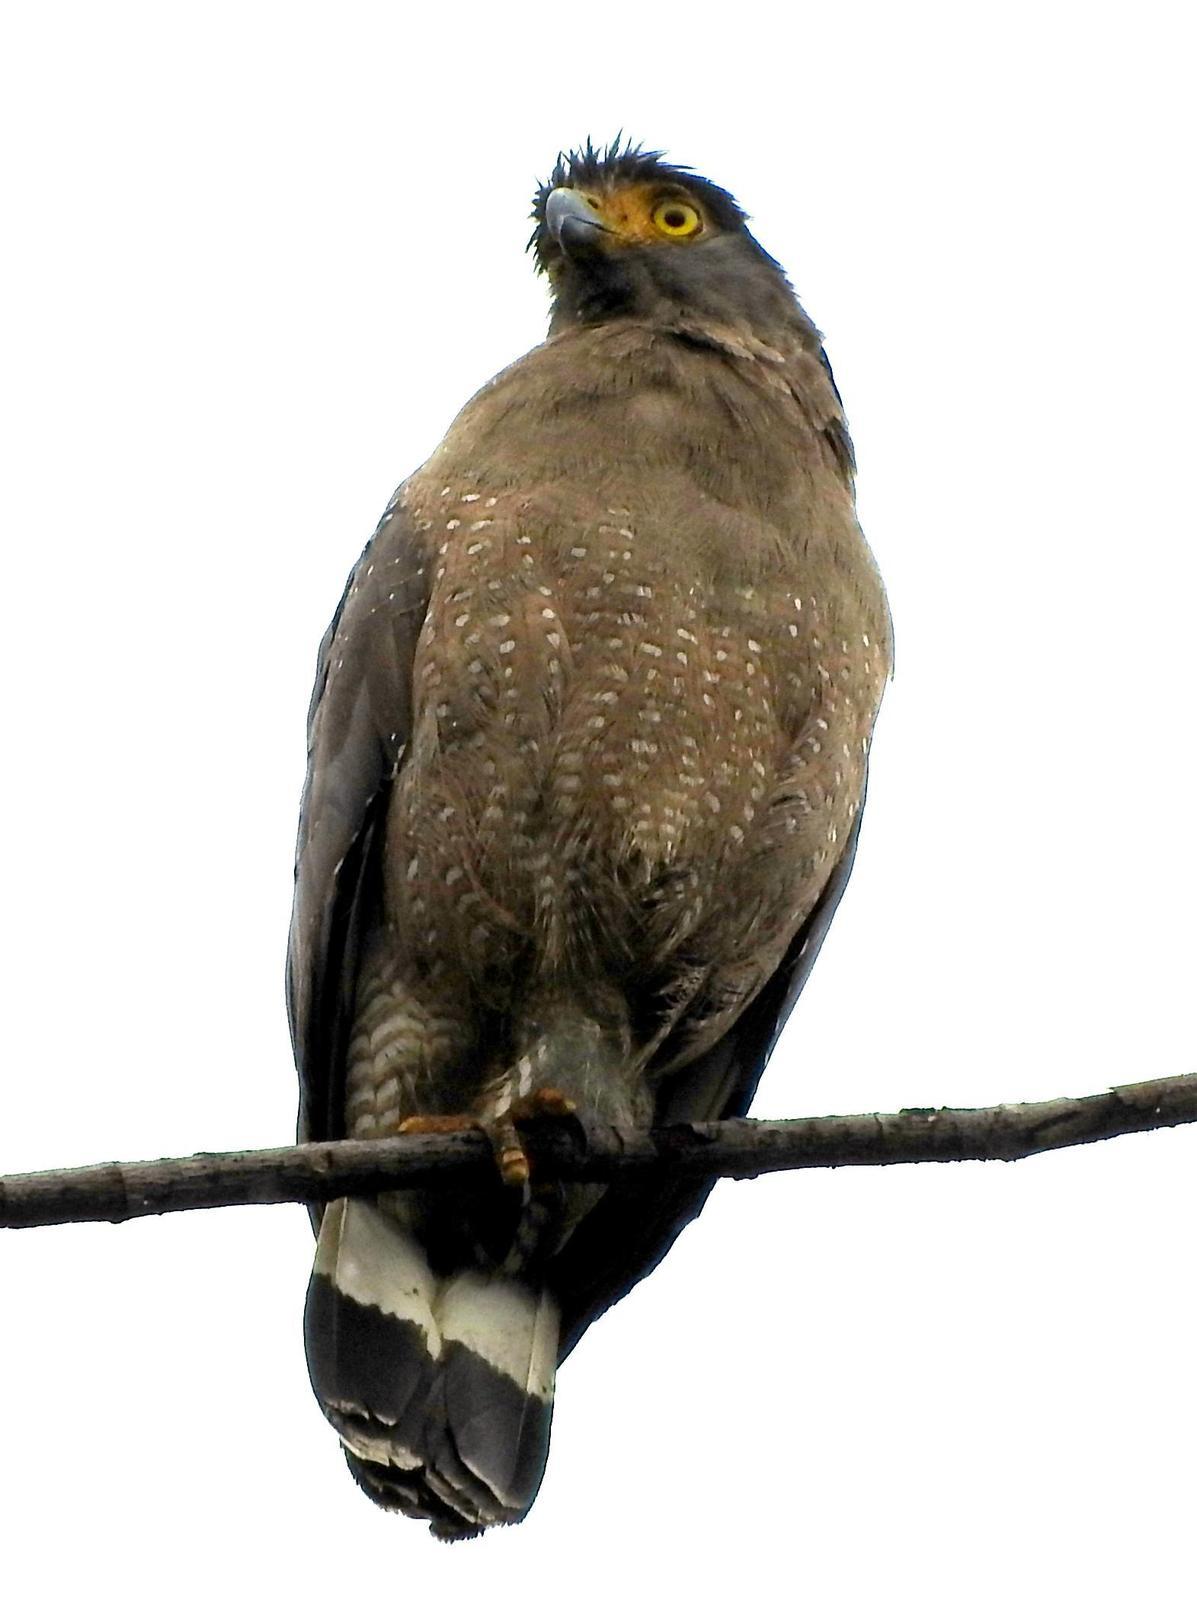 Crested Serpent-Eagle Photo by Todd A. Watkins